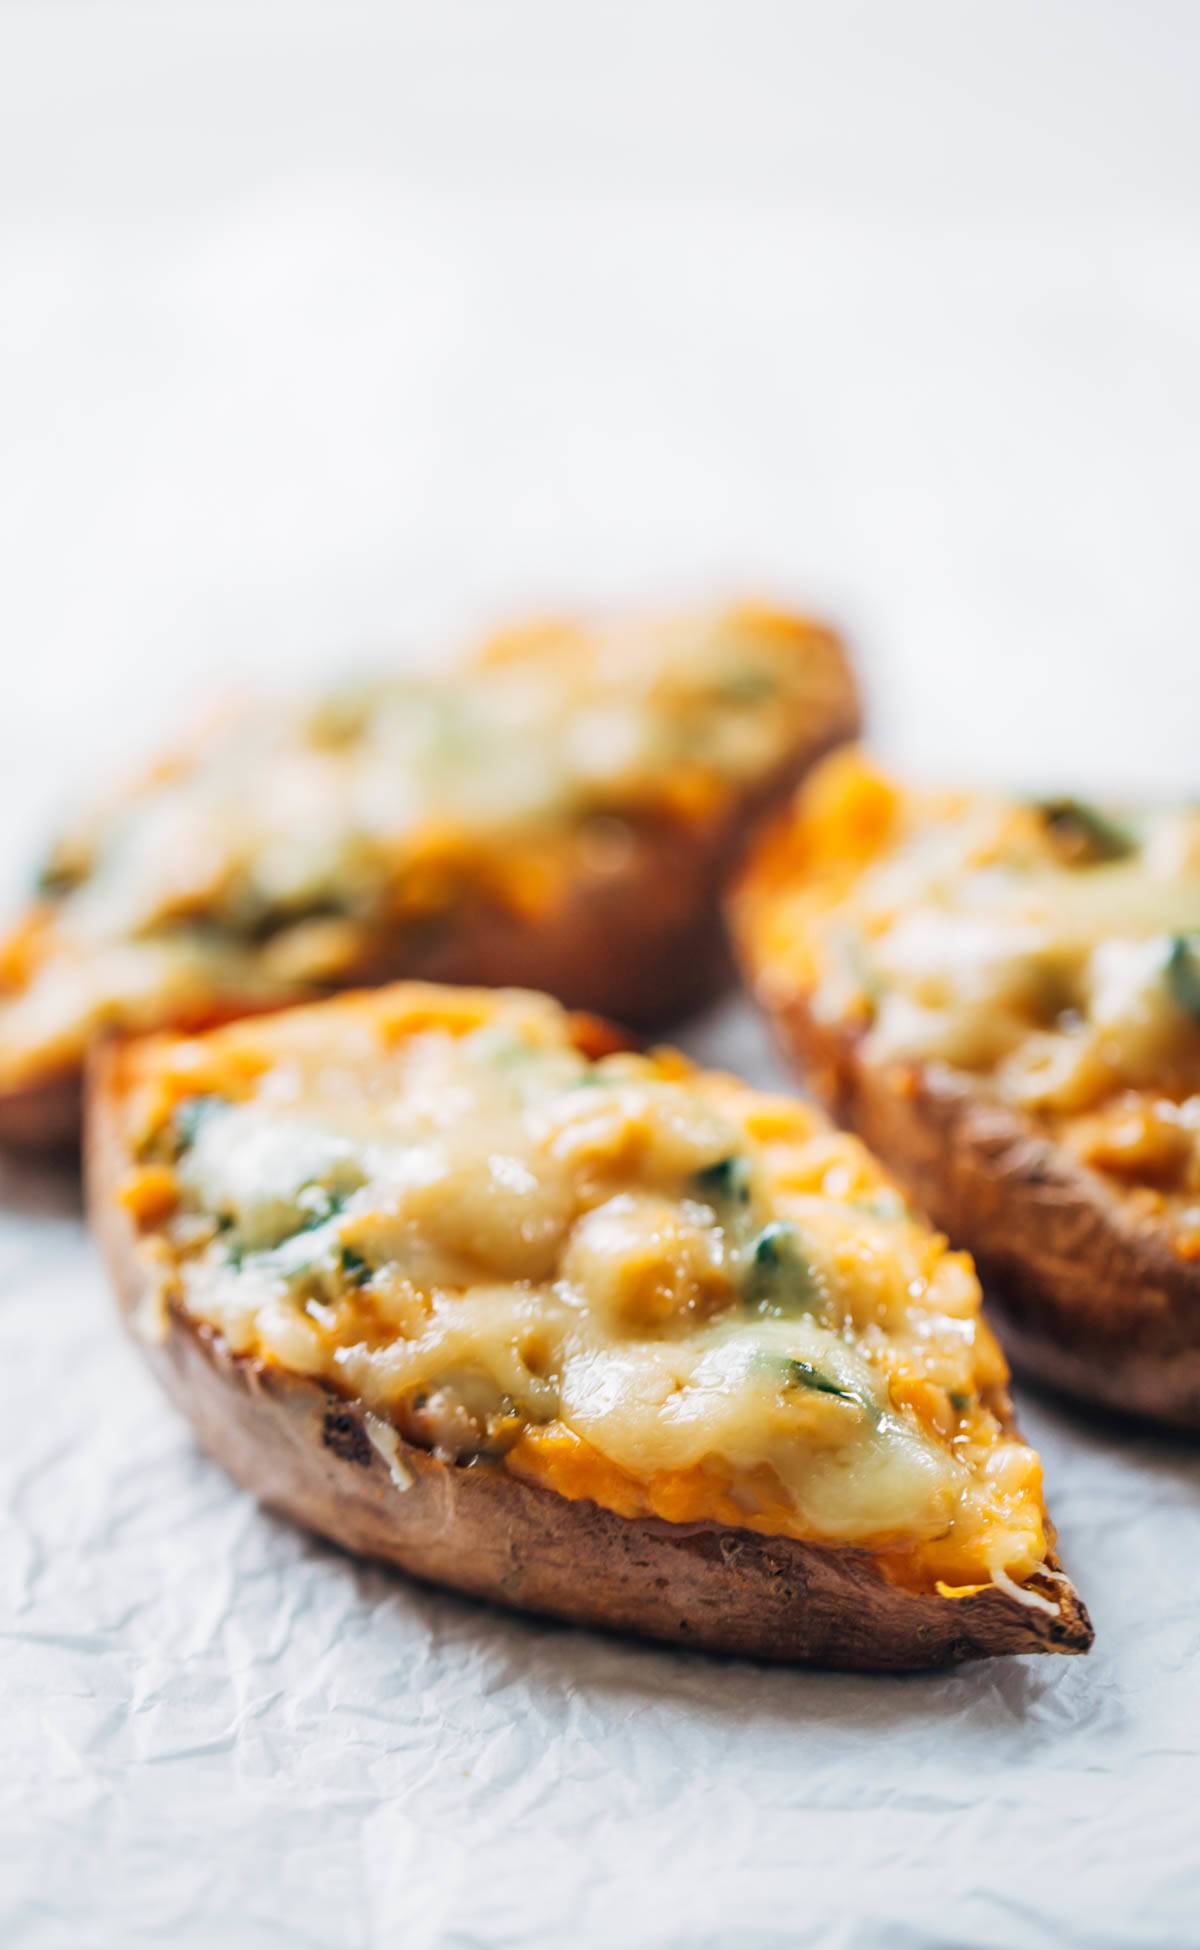 Healthy Sweet Potato Skins recipe - stuffed with a creamy spinach filling and covered with melted cheese. Yum! | pinchofyum.com